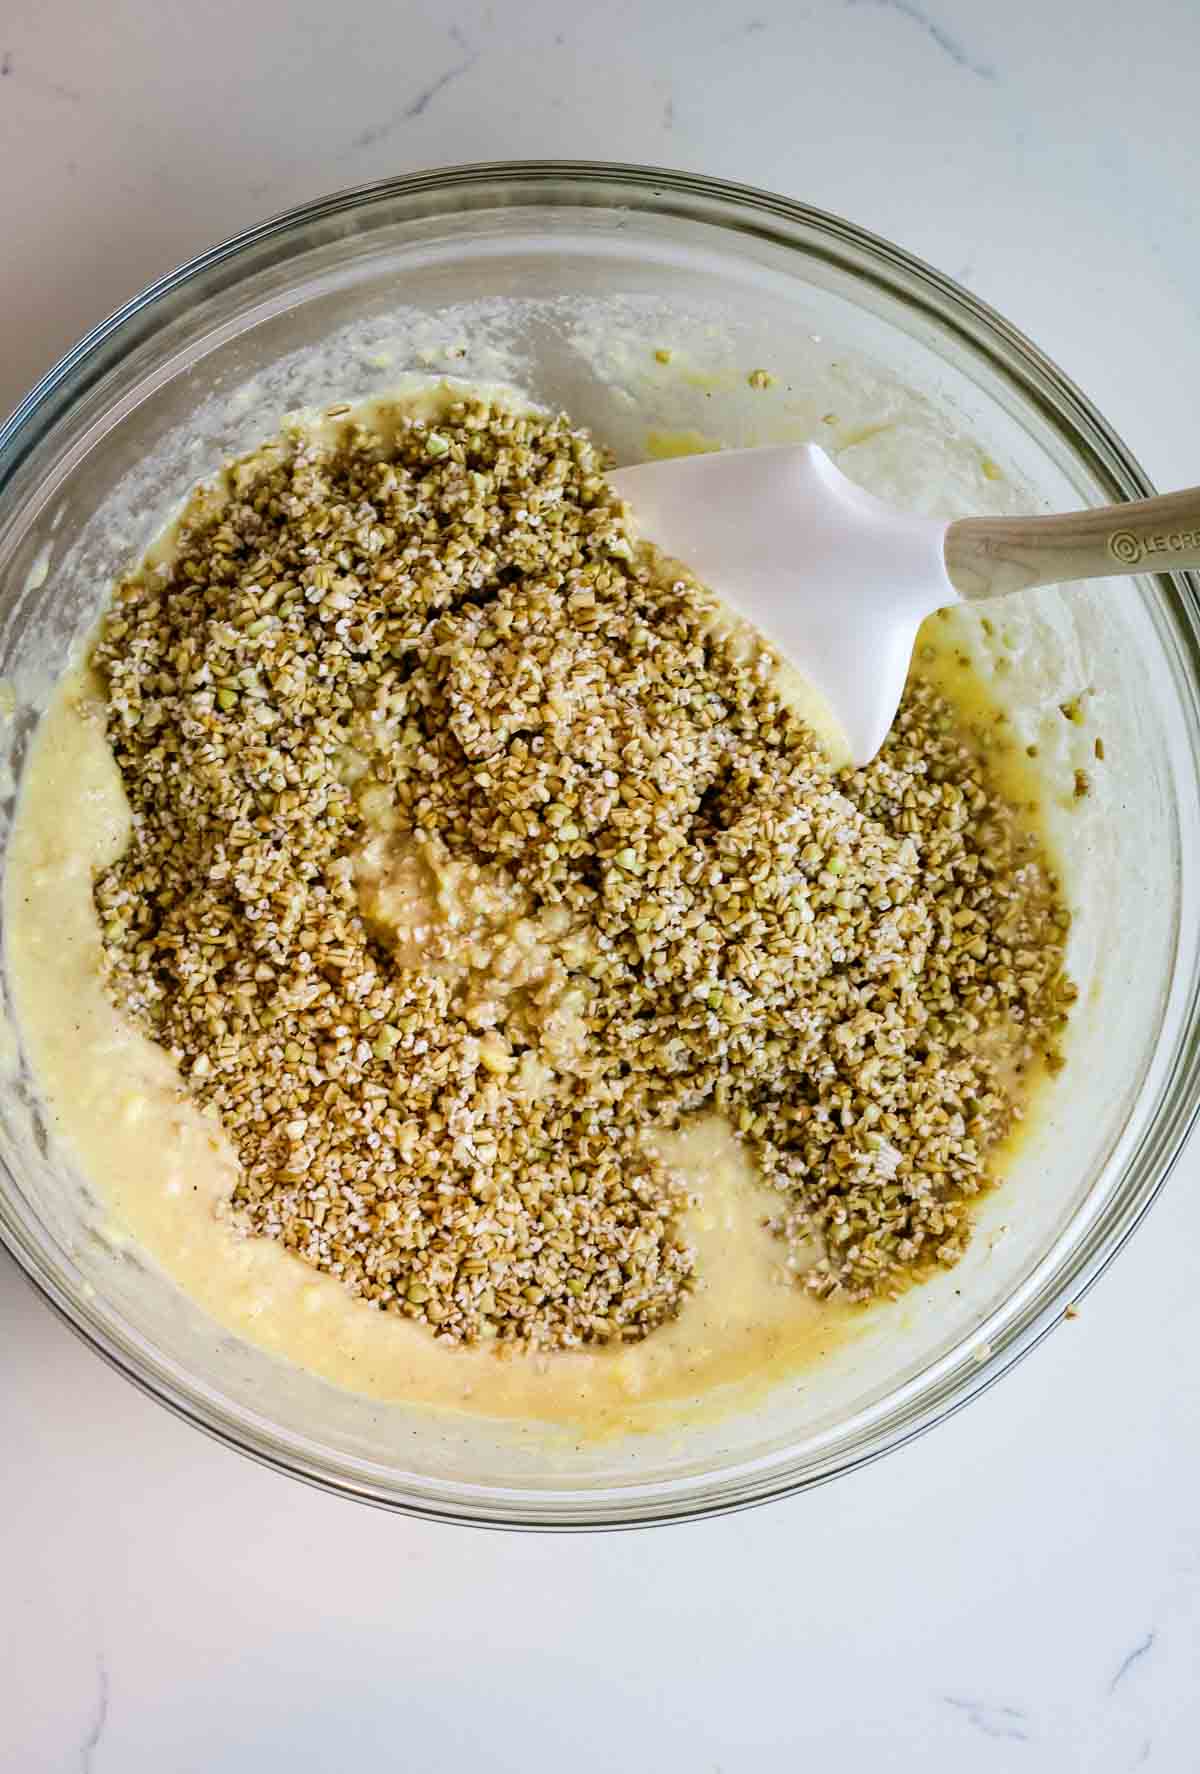 plastic spatula in a bowl with oats and other ingredients on white counter